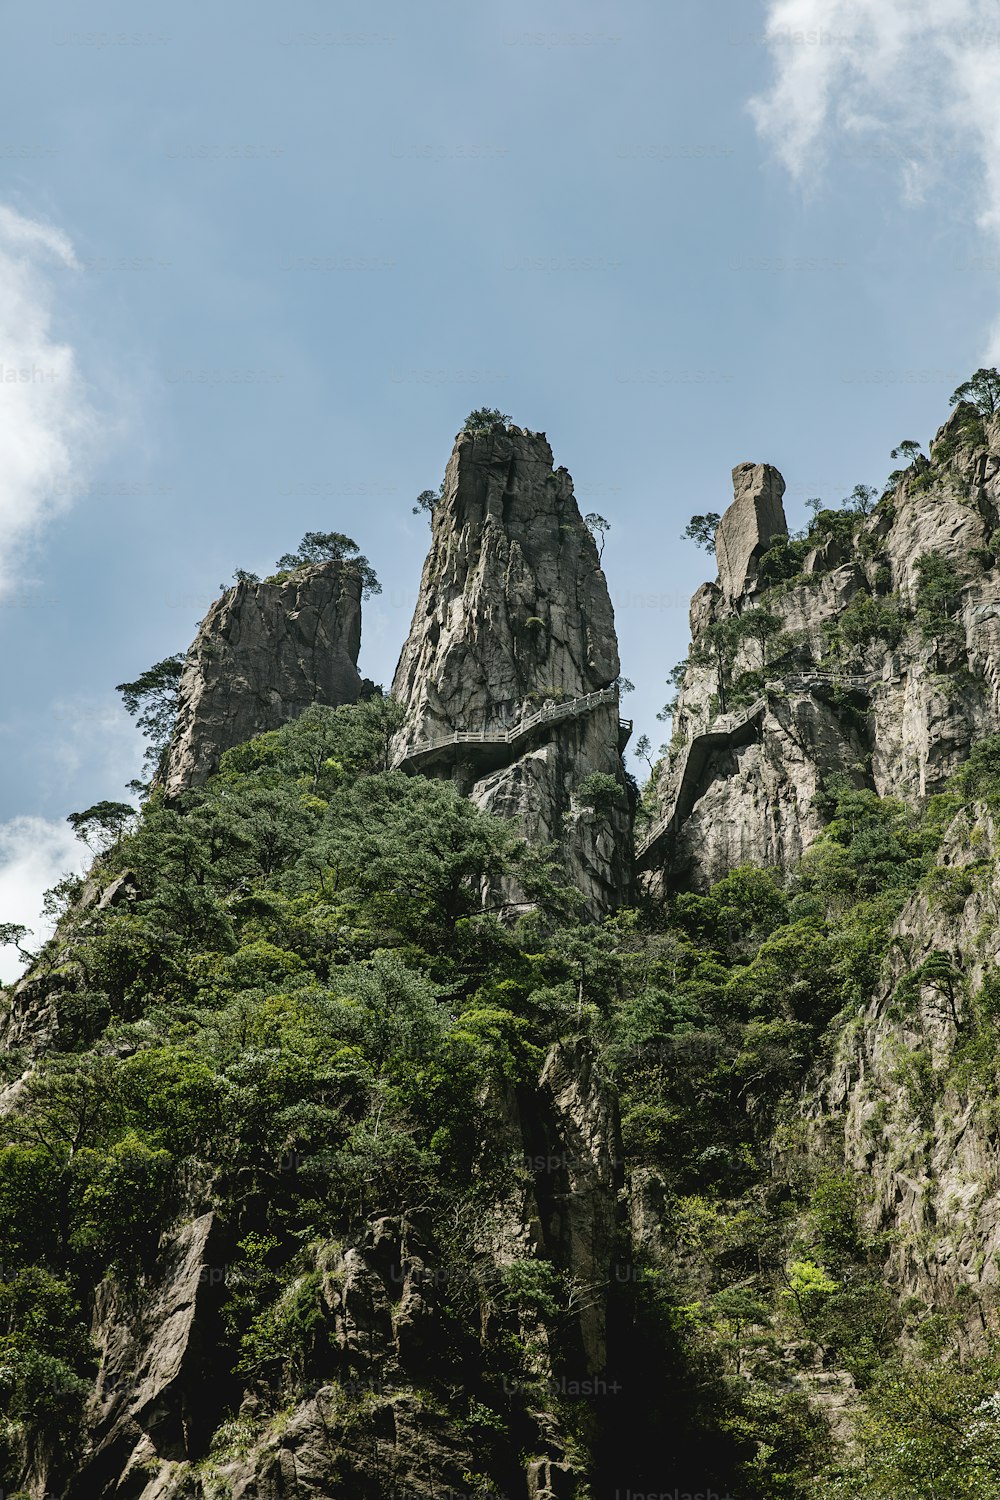 a large rock formation with trees growing on top of it